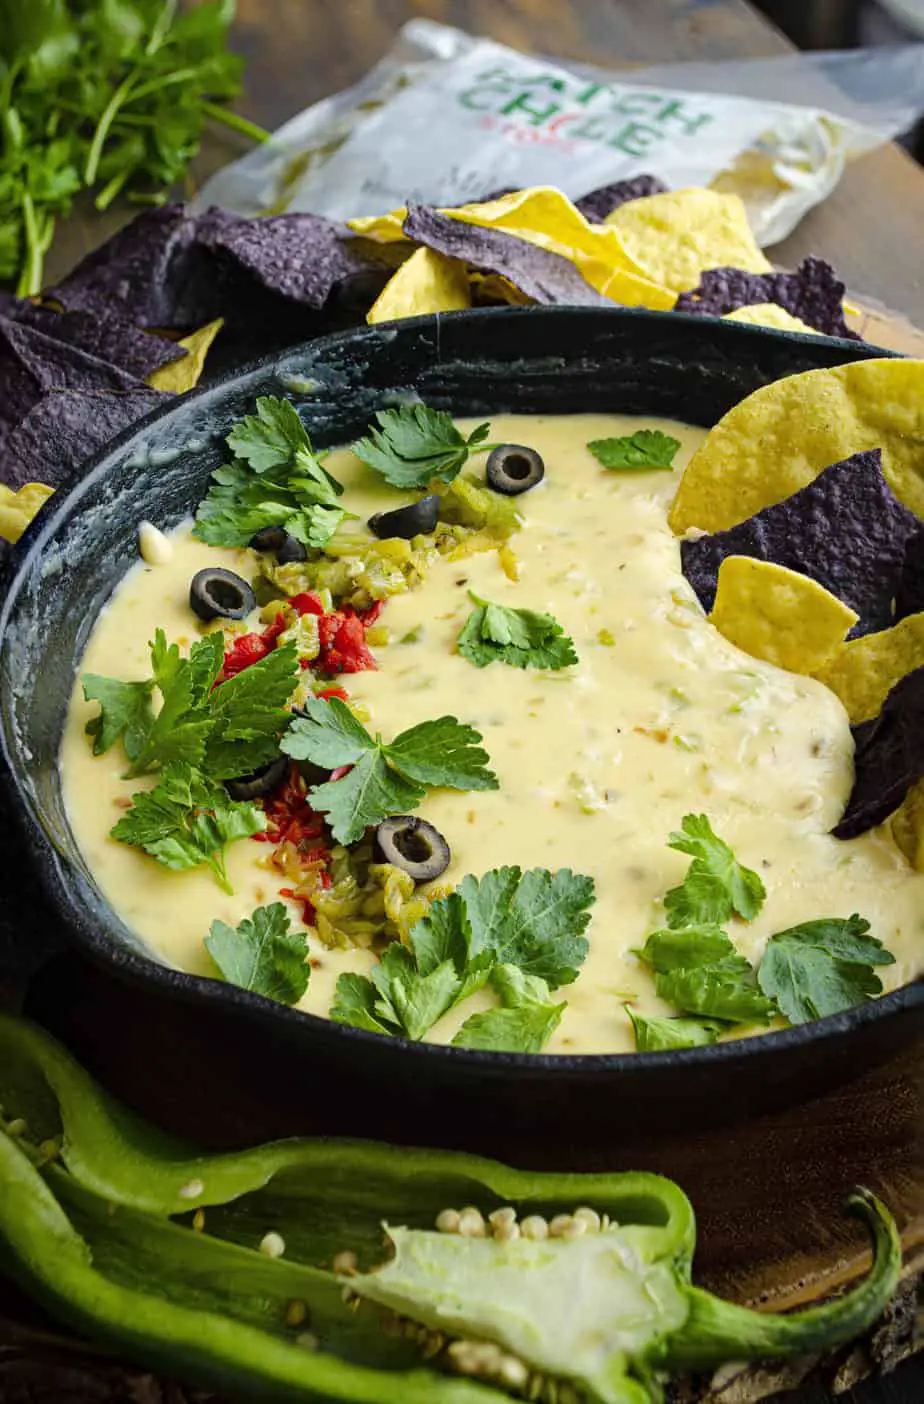 The Best Green Chile Queso + 10 Queso ideas besides Nachos